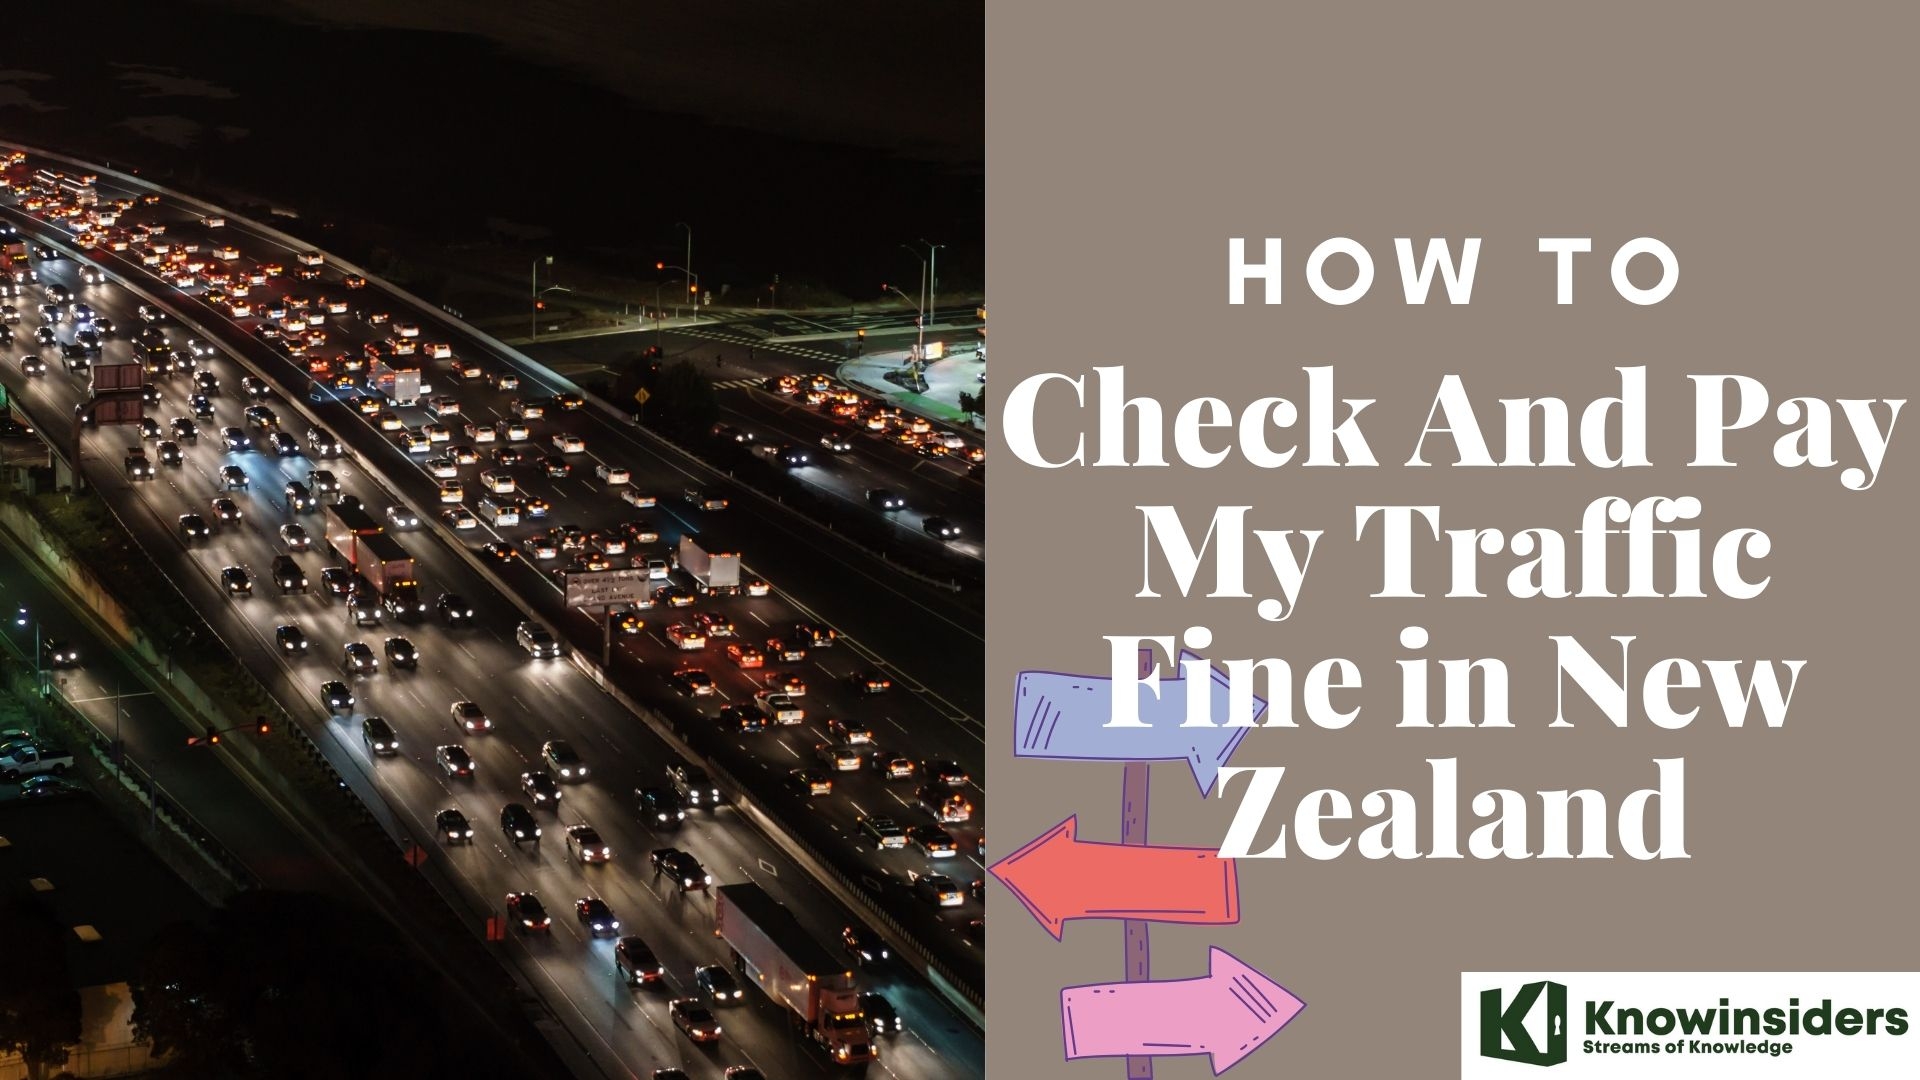 How To Check And Pay My Traffic Fine Tickets Online in New Zealand